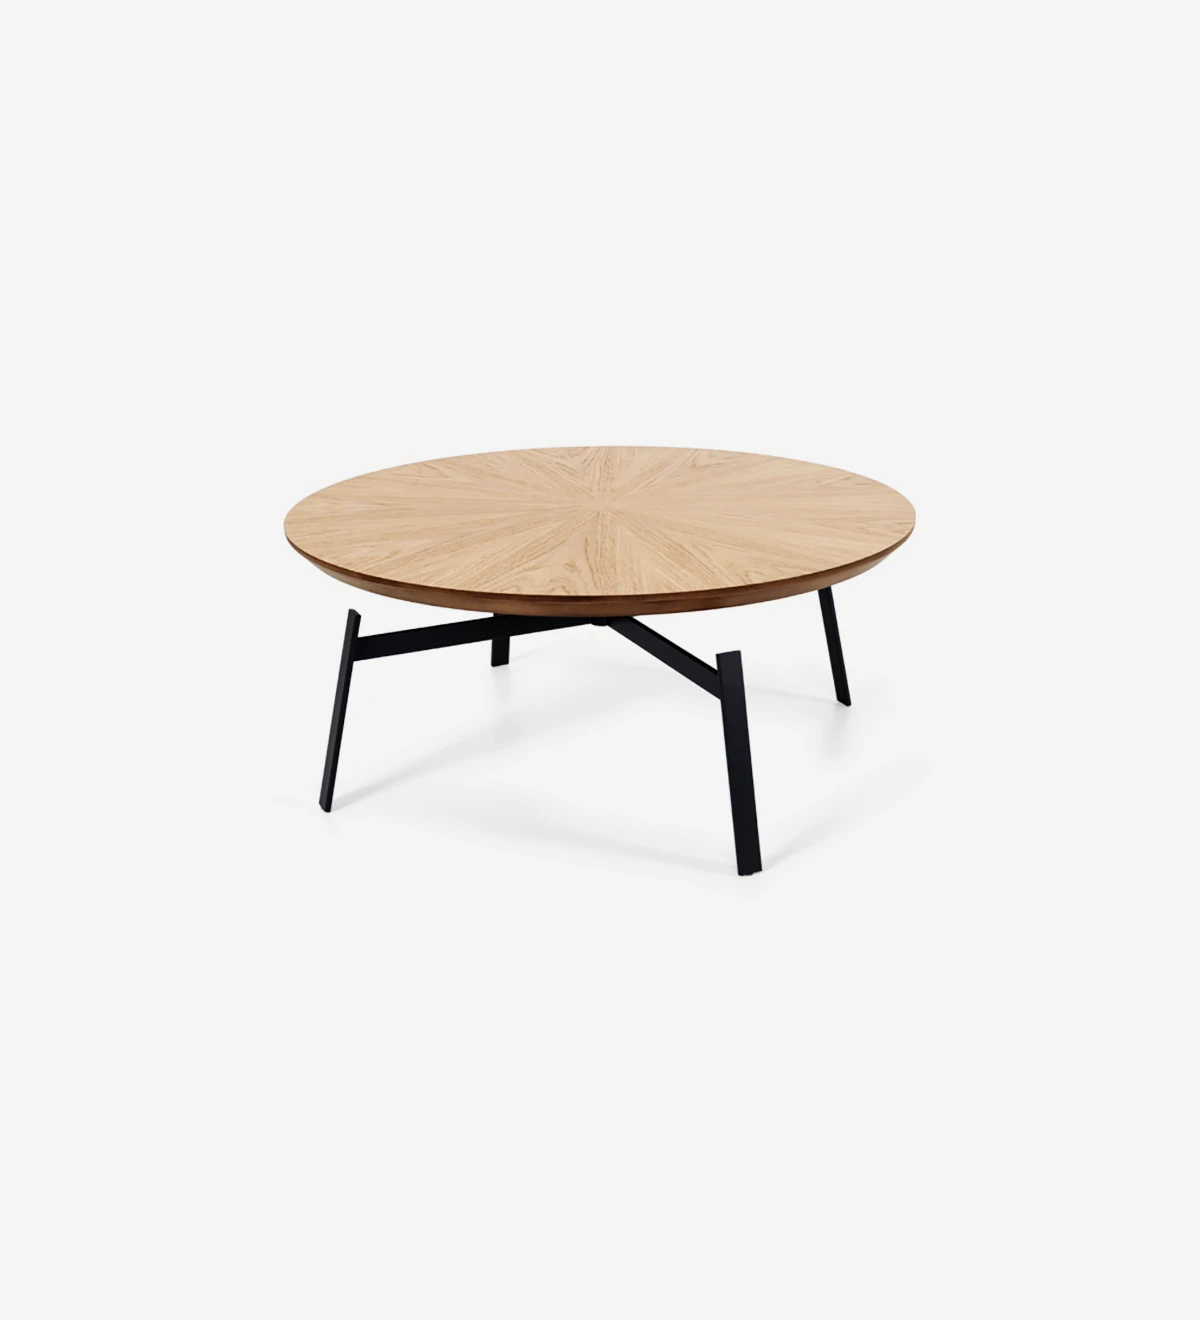 Round center table with natural oak top and black lacquered metallic foot